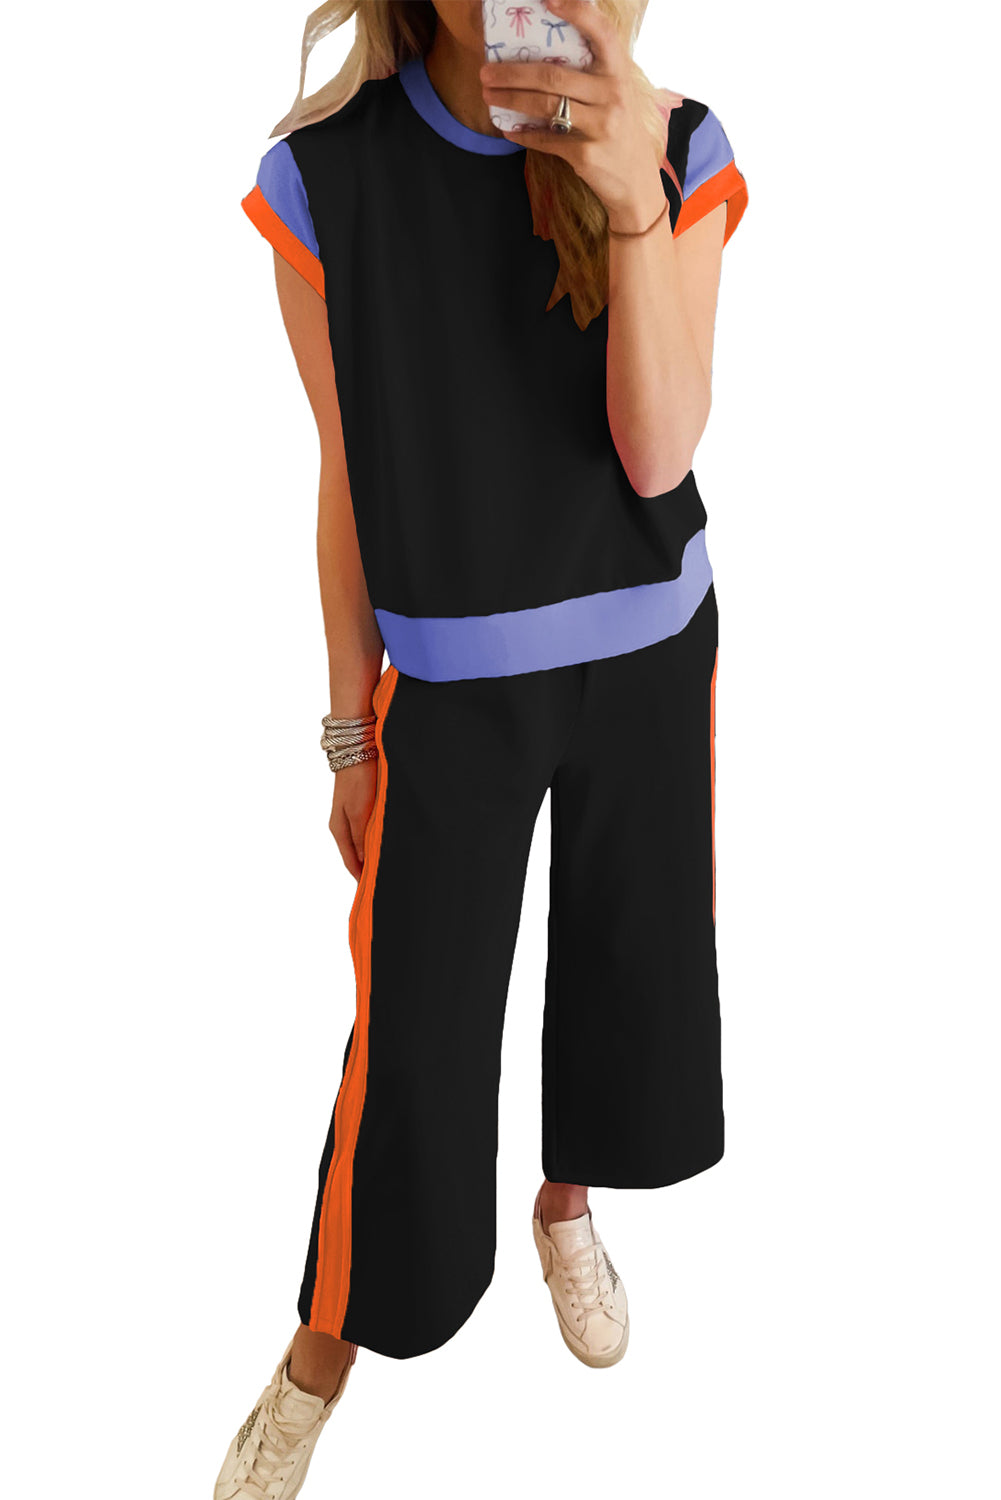 - Colorblock Cap Sleeve Tee and Wide Leg Pants Women's Outfit - womens outfit set at TFC&H Co.